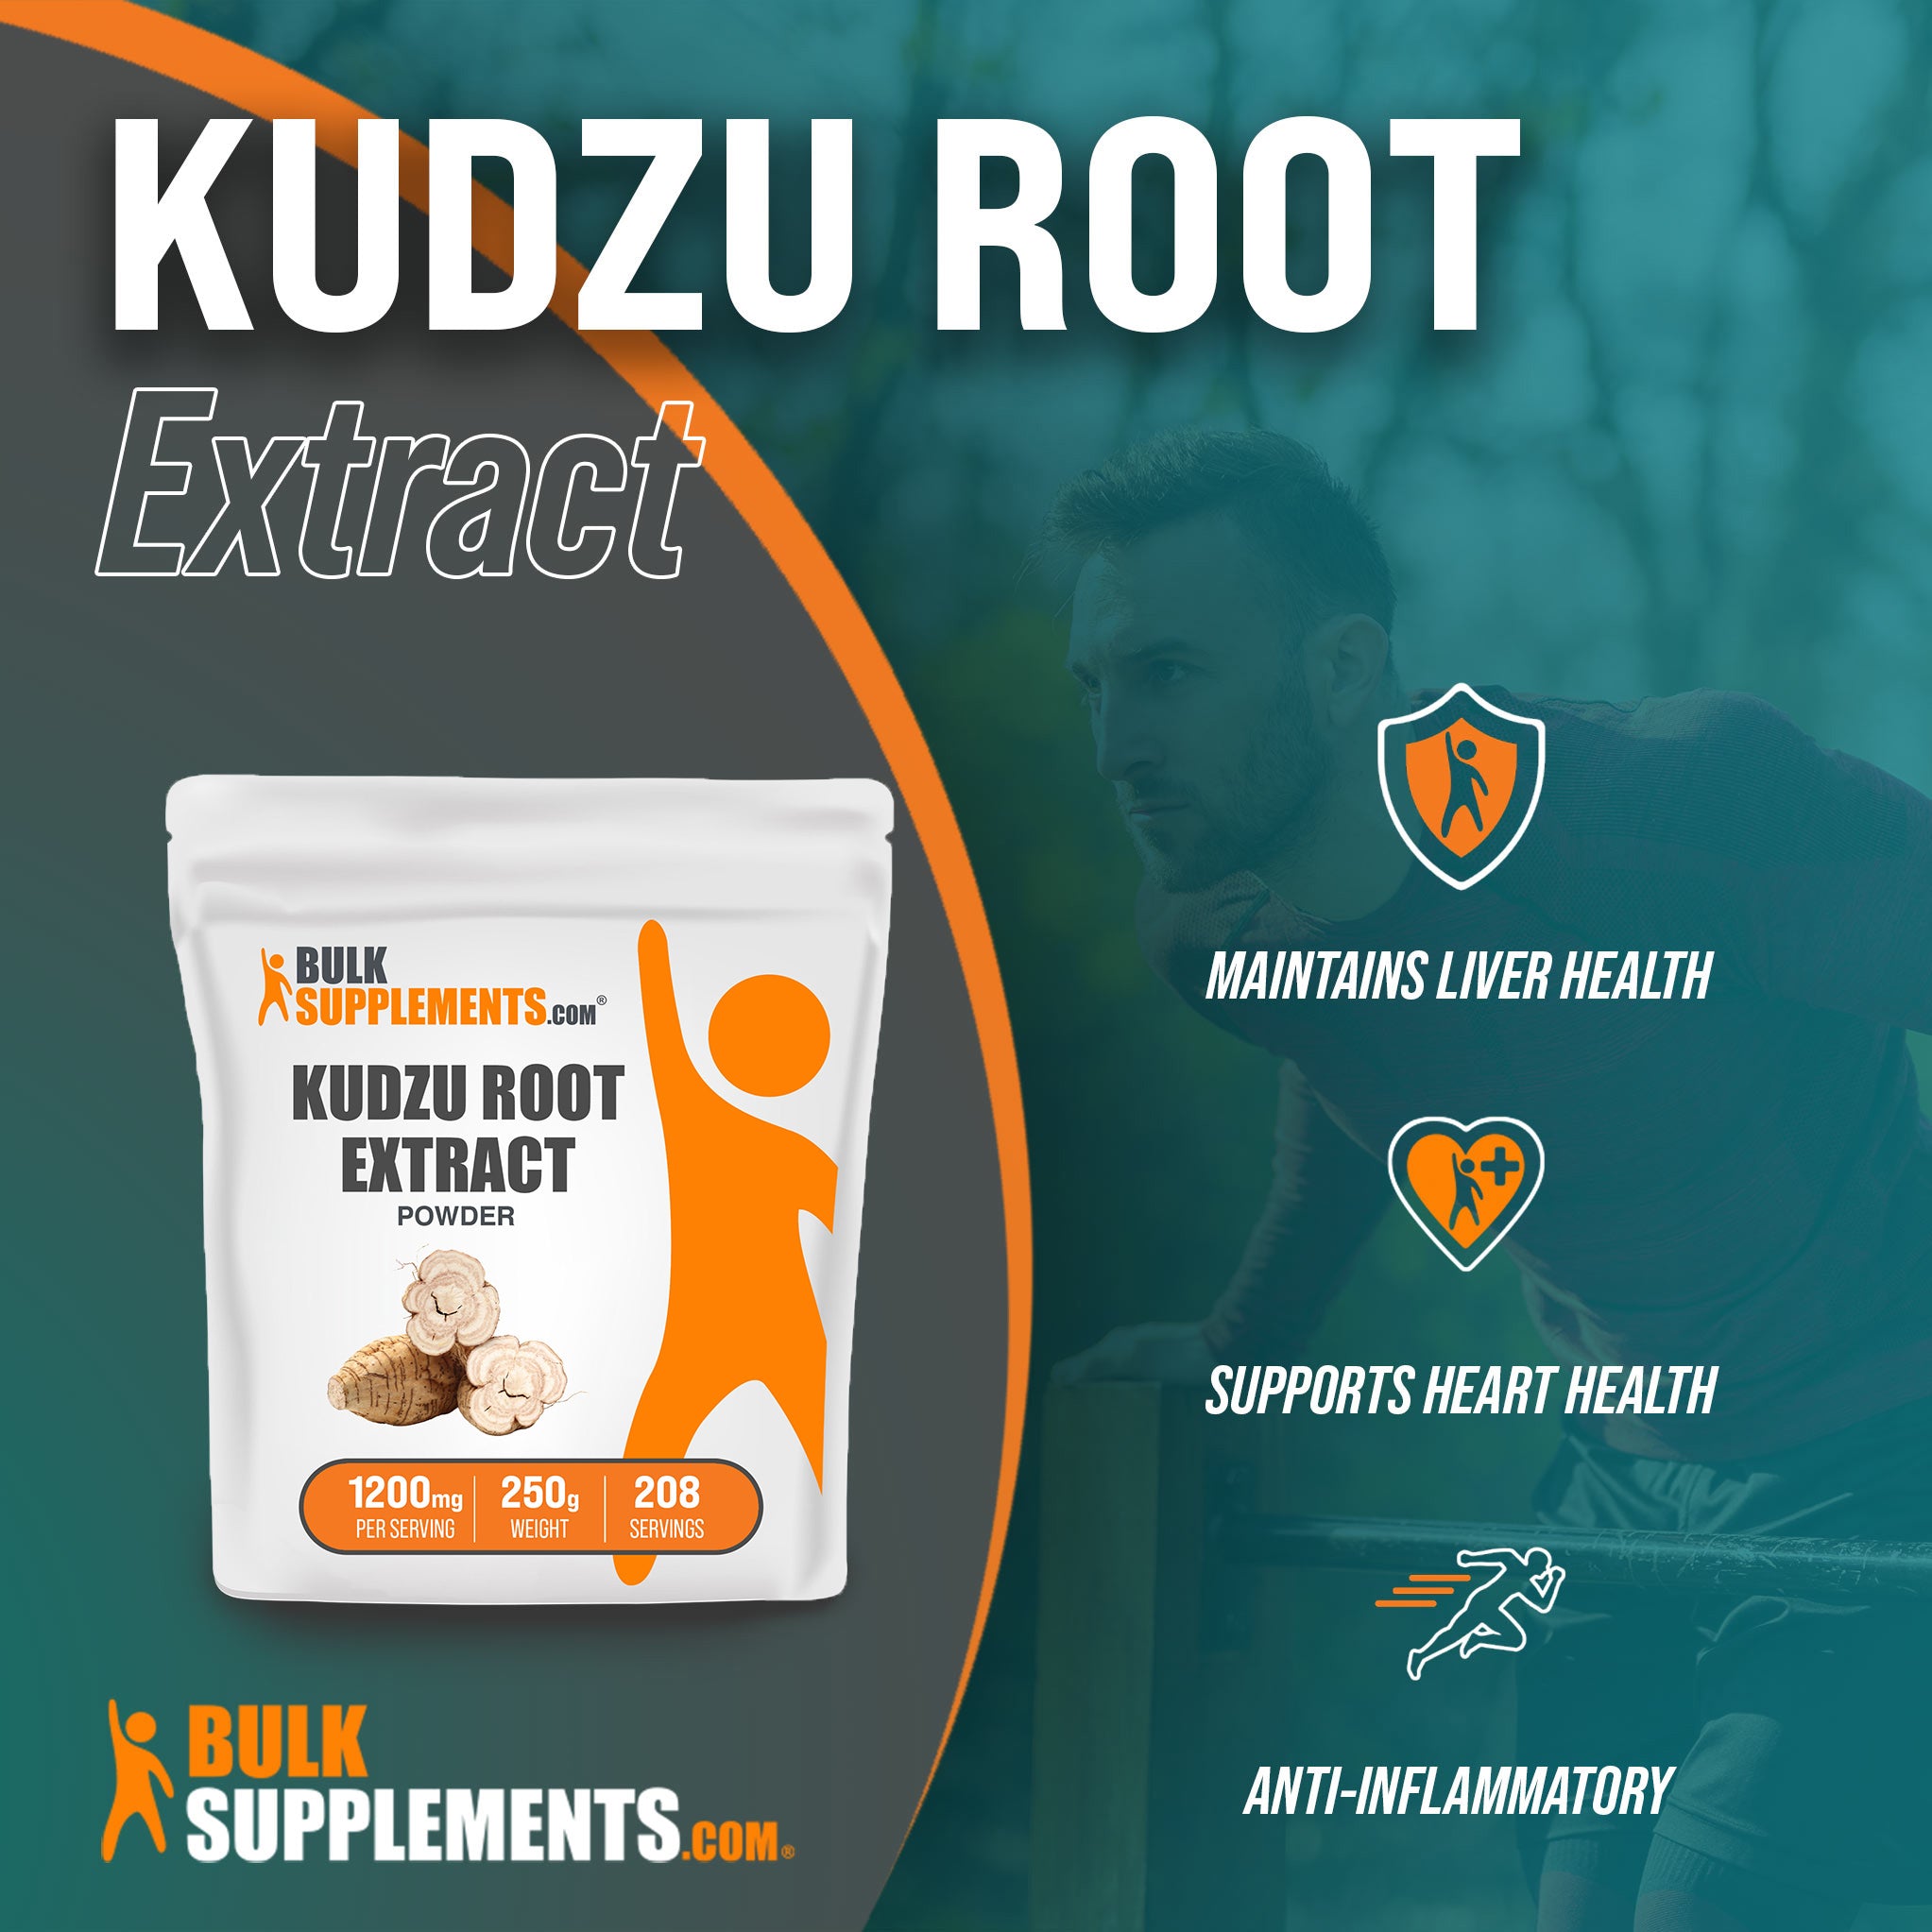 Benefits of Kudzu Root Extract; maintains liver health, supports heart health, anti-inflammatory